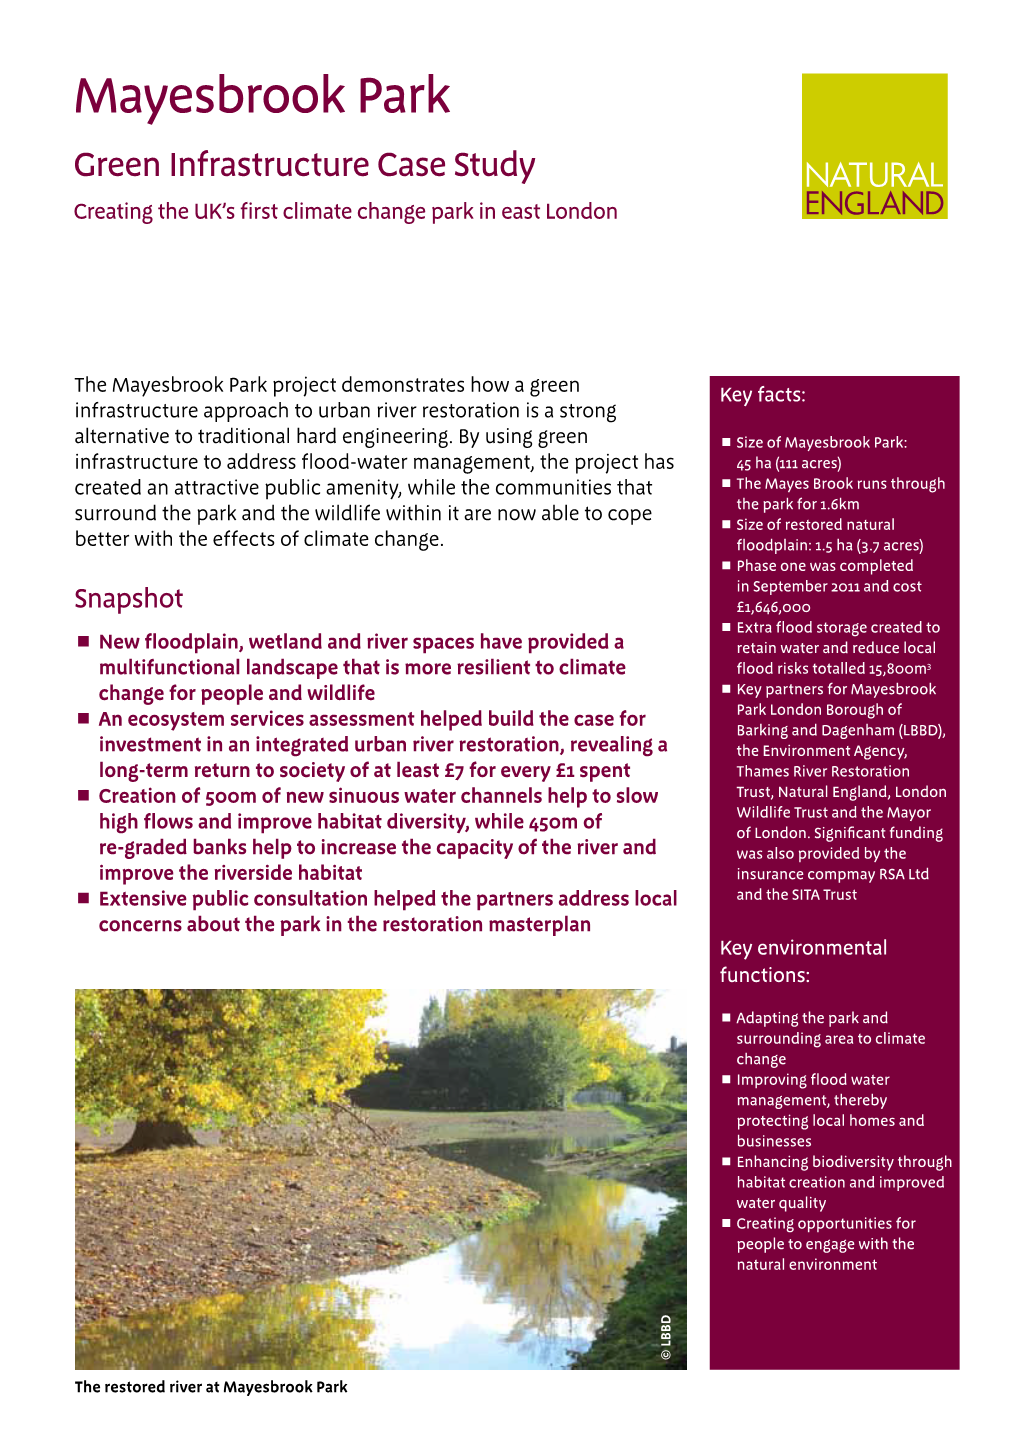 Mayesbrook Park Green Infrastructure Case Study Creating the UK’S First Climate Change Park in East London